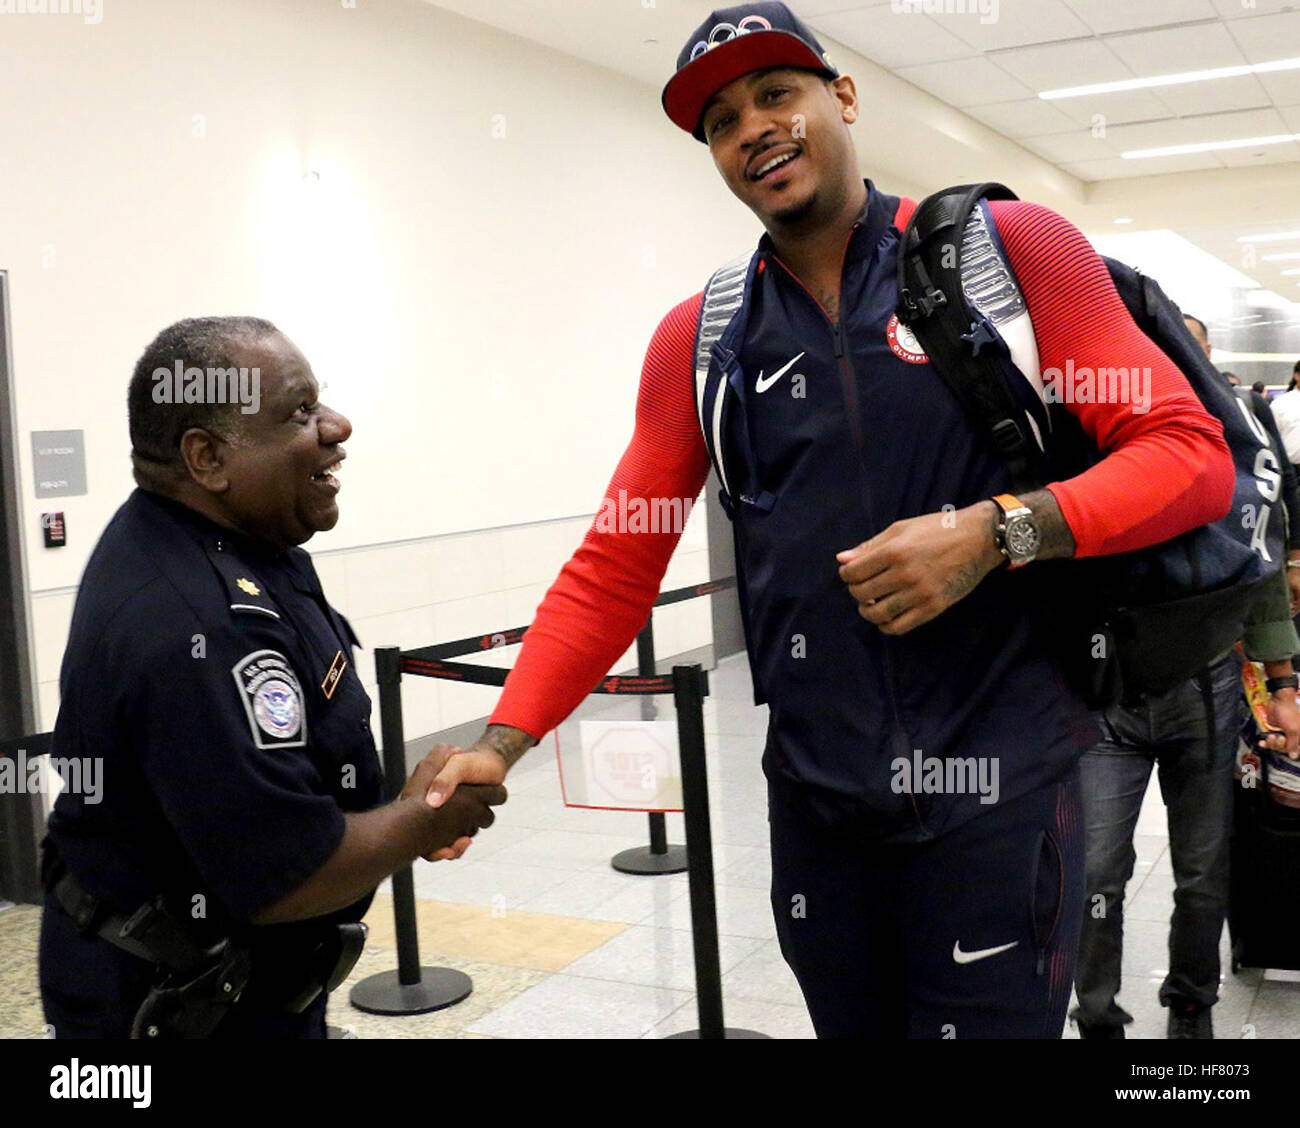 Olympic athletes, families and passengers were welcomed and cleared by U.S. Customs and Border Protection officers at Hartsfield Jackson Atlanta International Airport. Carmelo Anthony, center for the U.S. Olympic Men’s basketball team processes back into the United States from the Olympic games in Rio. Stock Photo